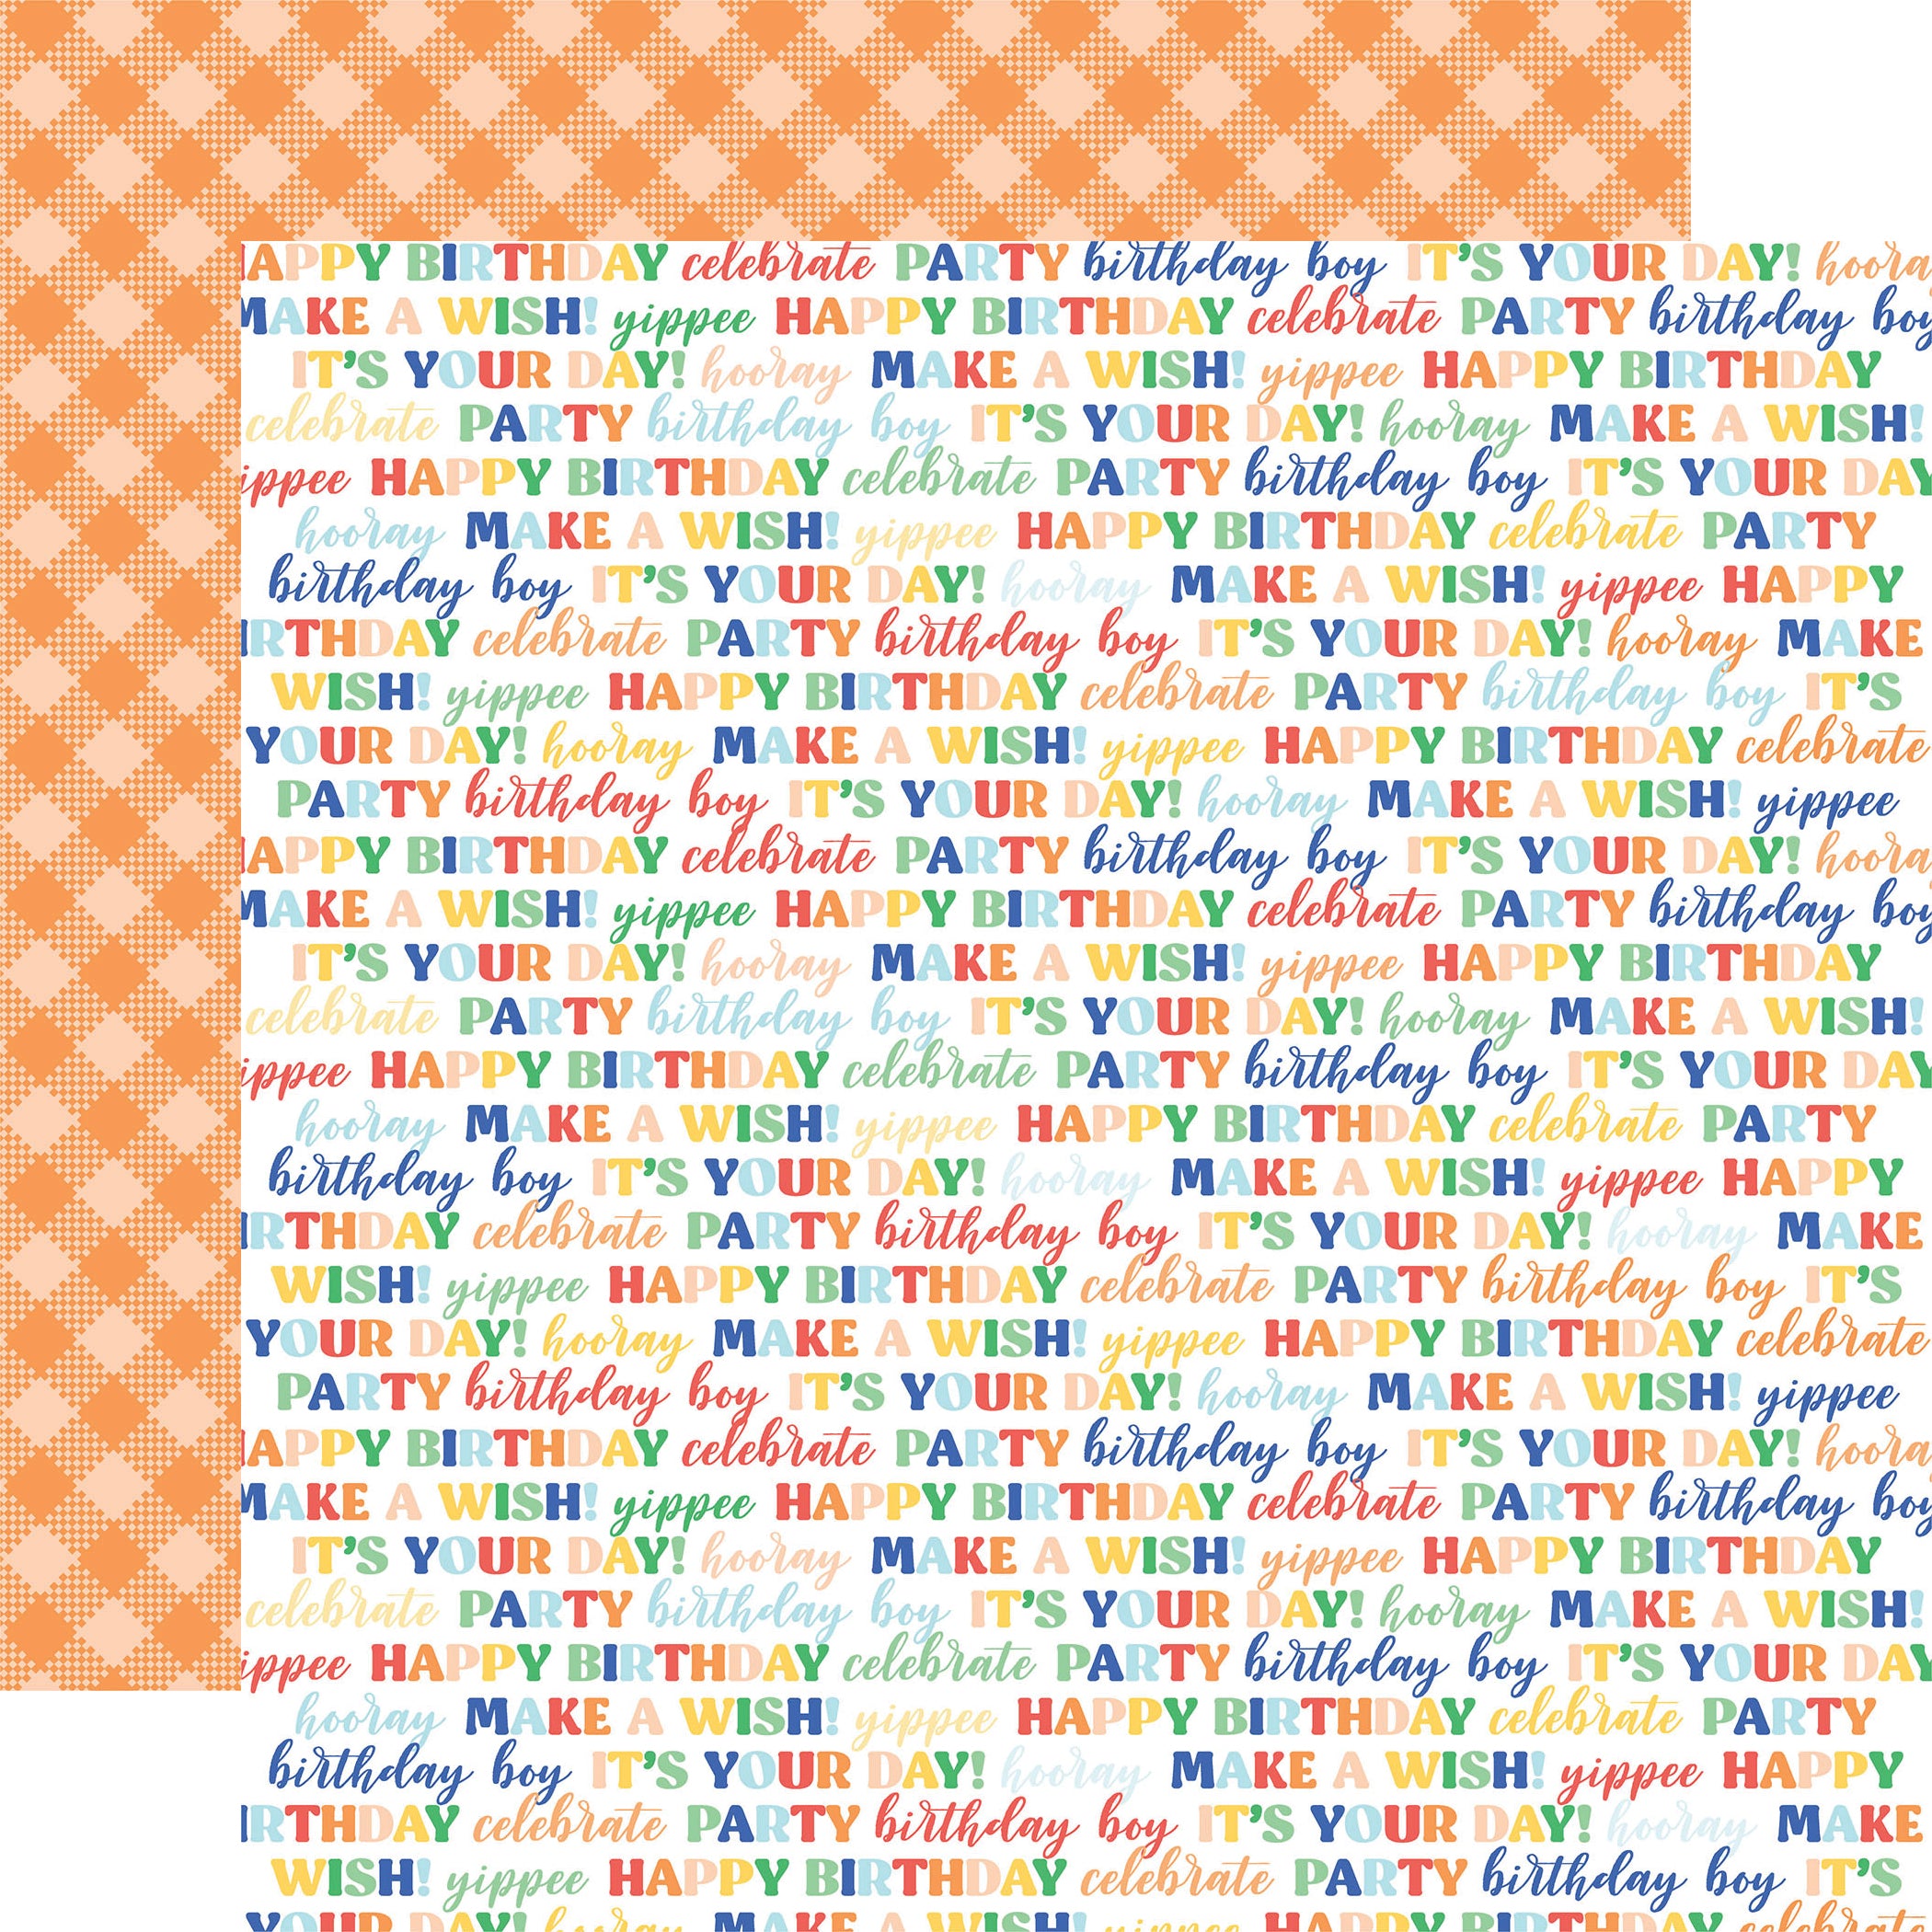 Make a Wish Birthday Boy Collection Birthday Phrases 12 x 12 Double-Sided Scrapbook Paper by Echo Park Paper